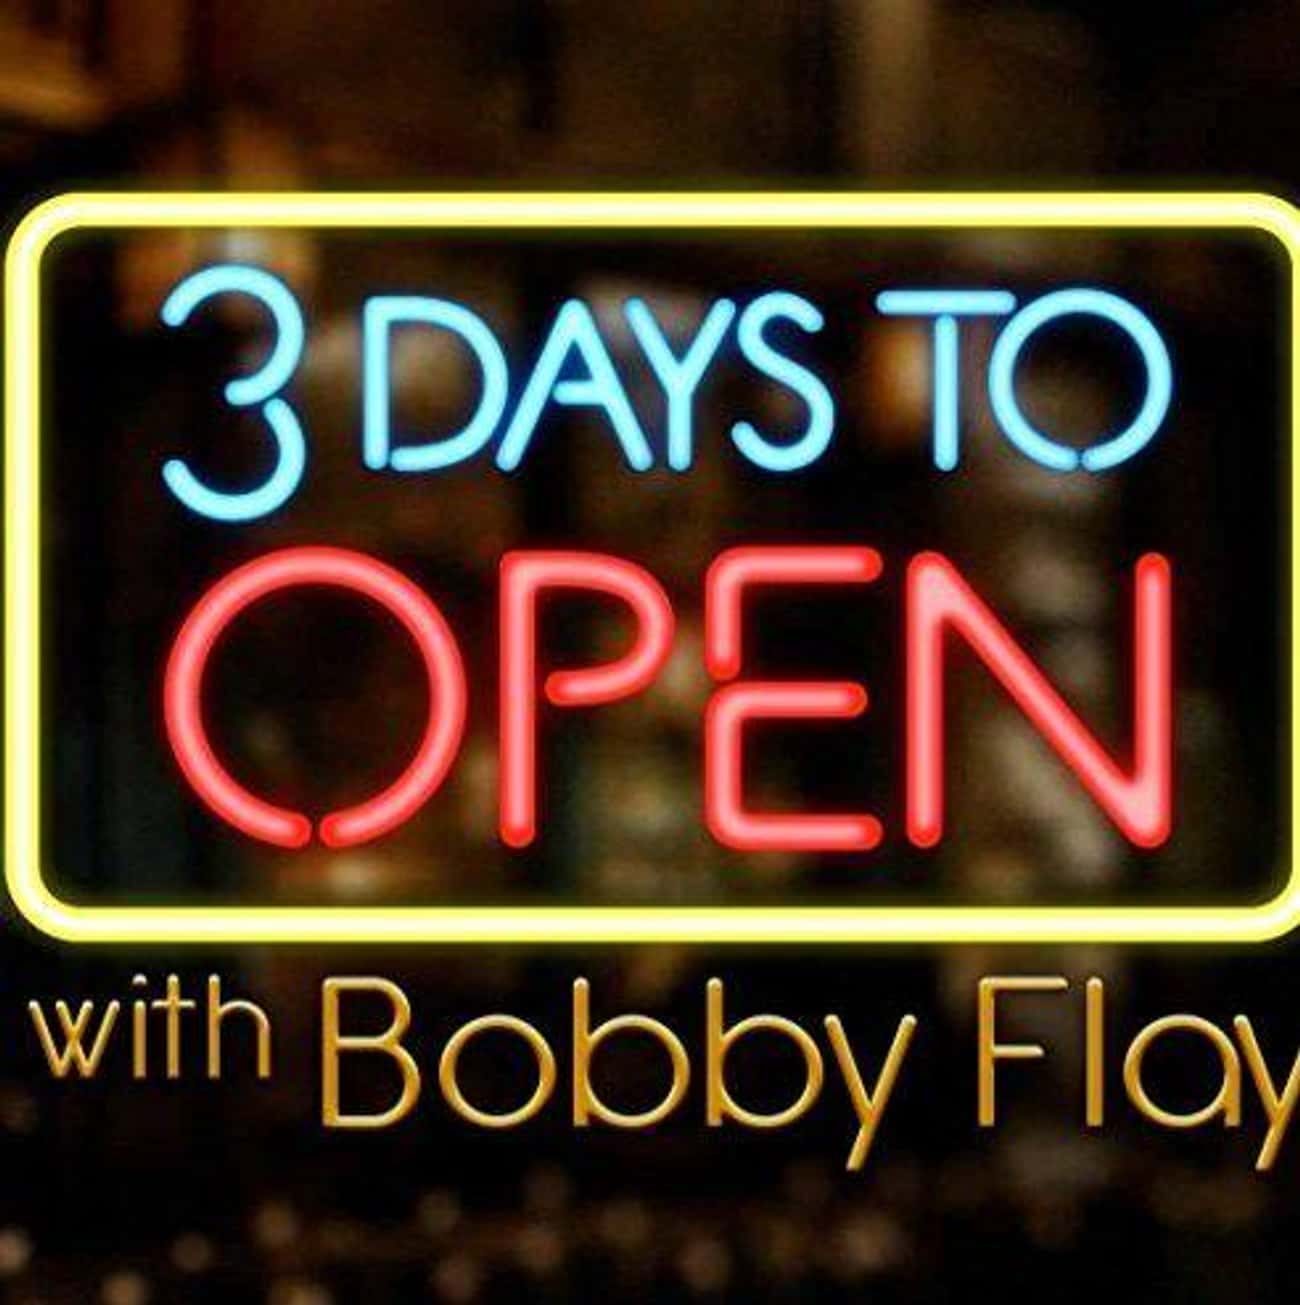 3 Days to Open with Bobby Flay